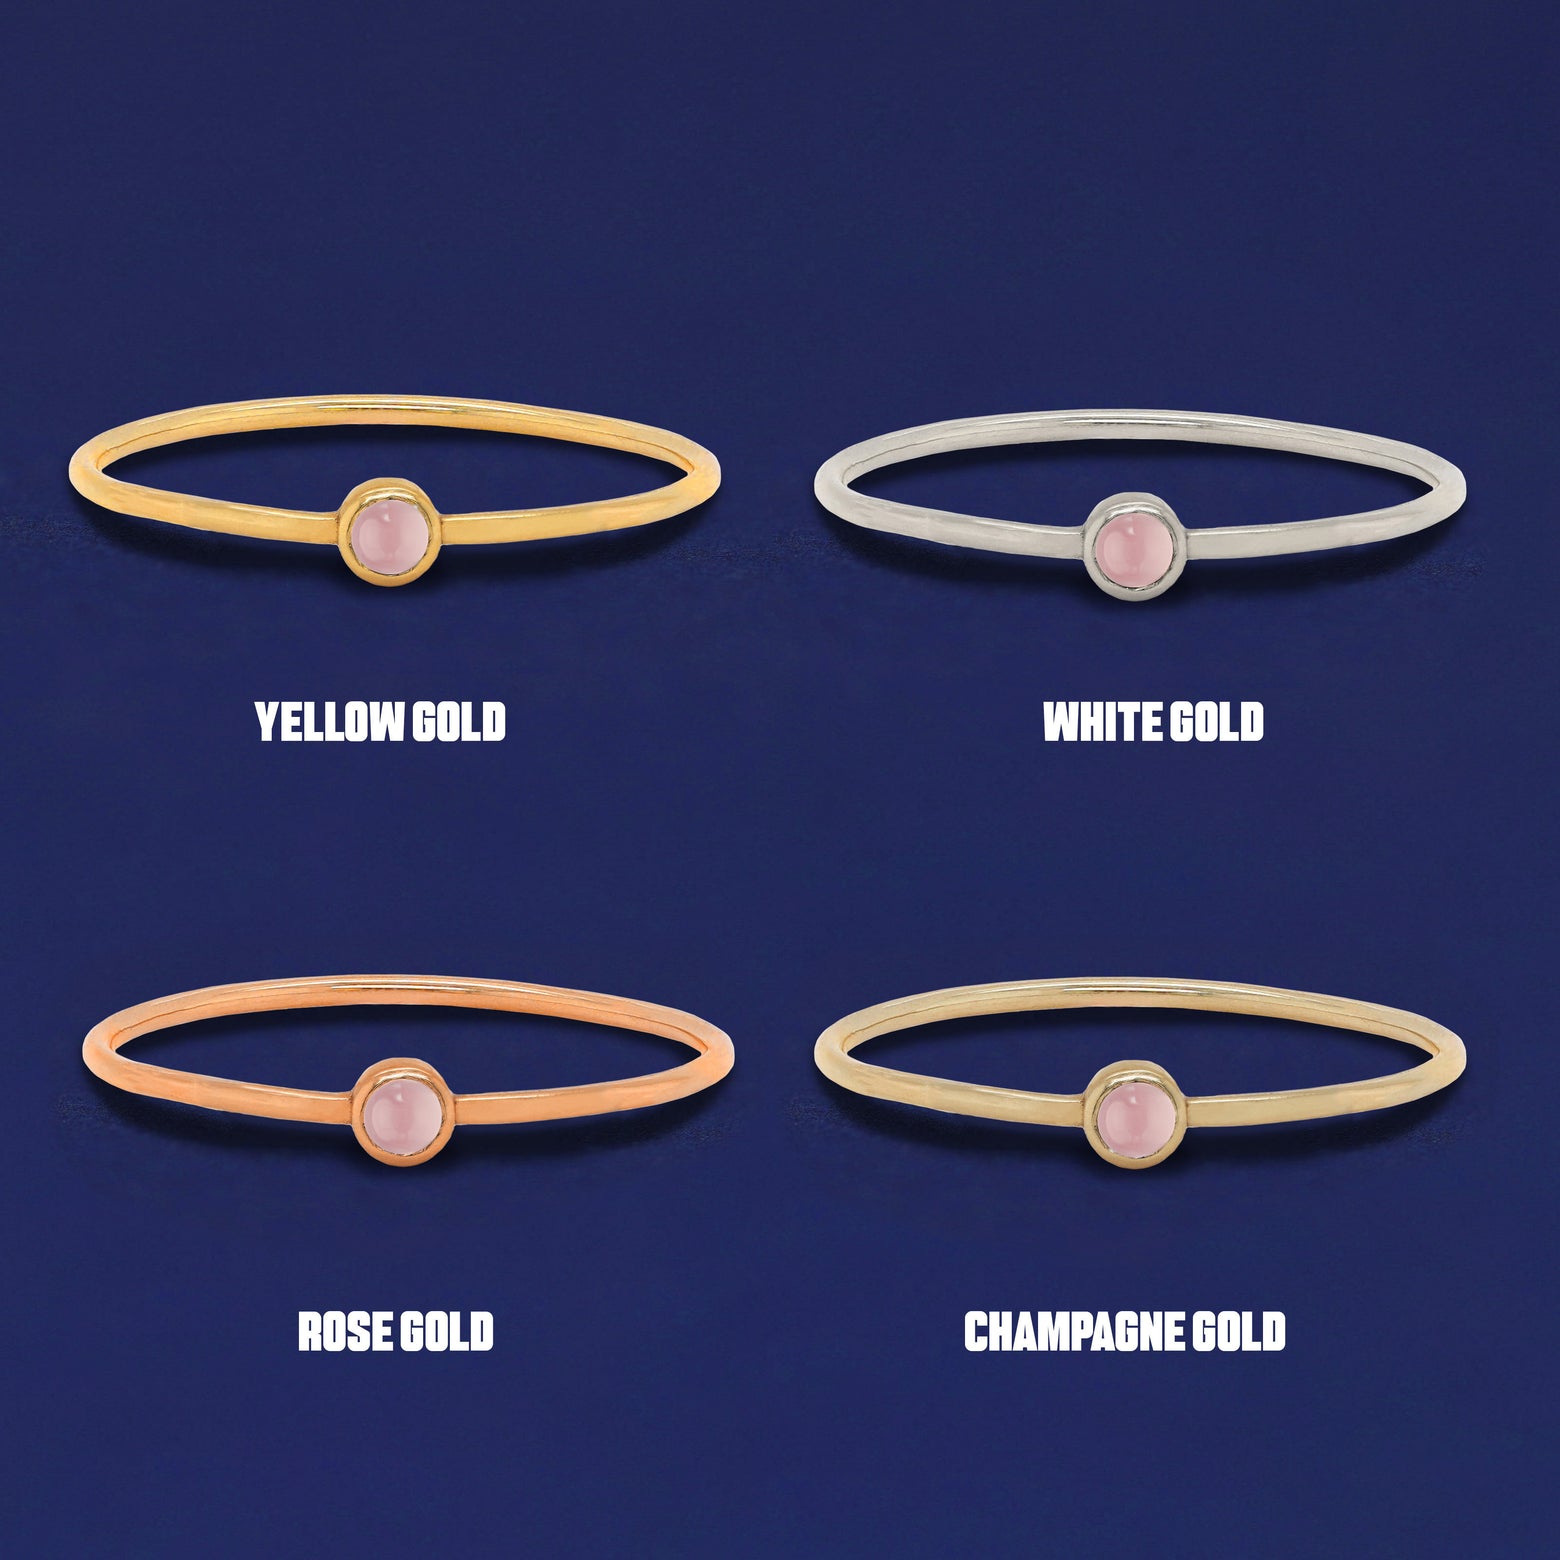 Four versions of the Rose Quartz Ring shown in options of yellow, white, rose and champagne gold